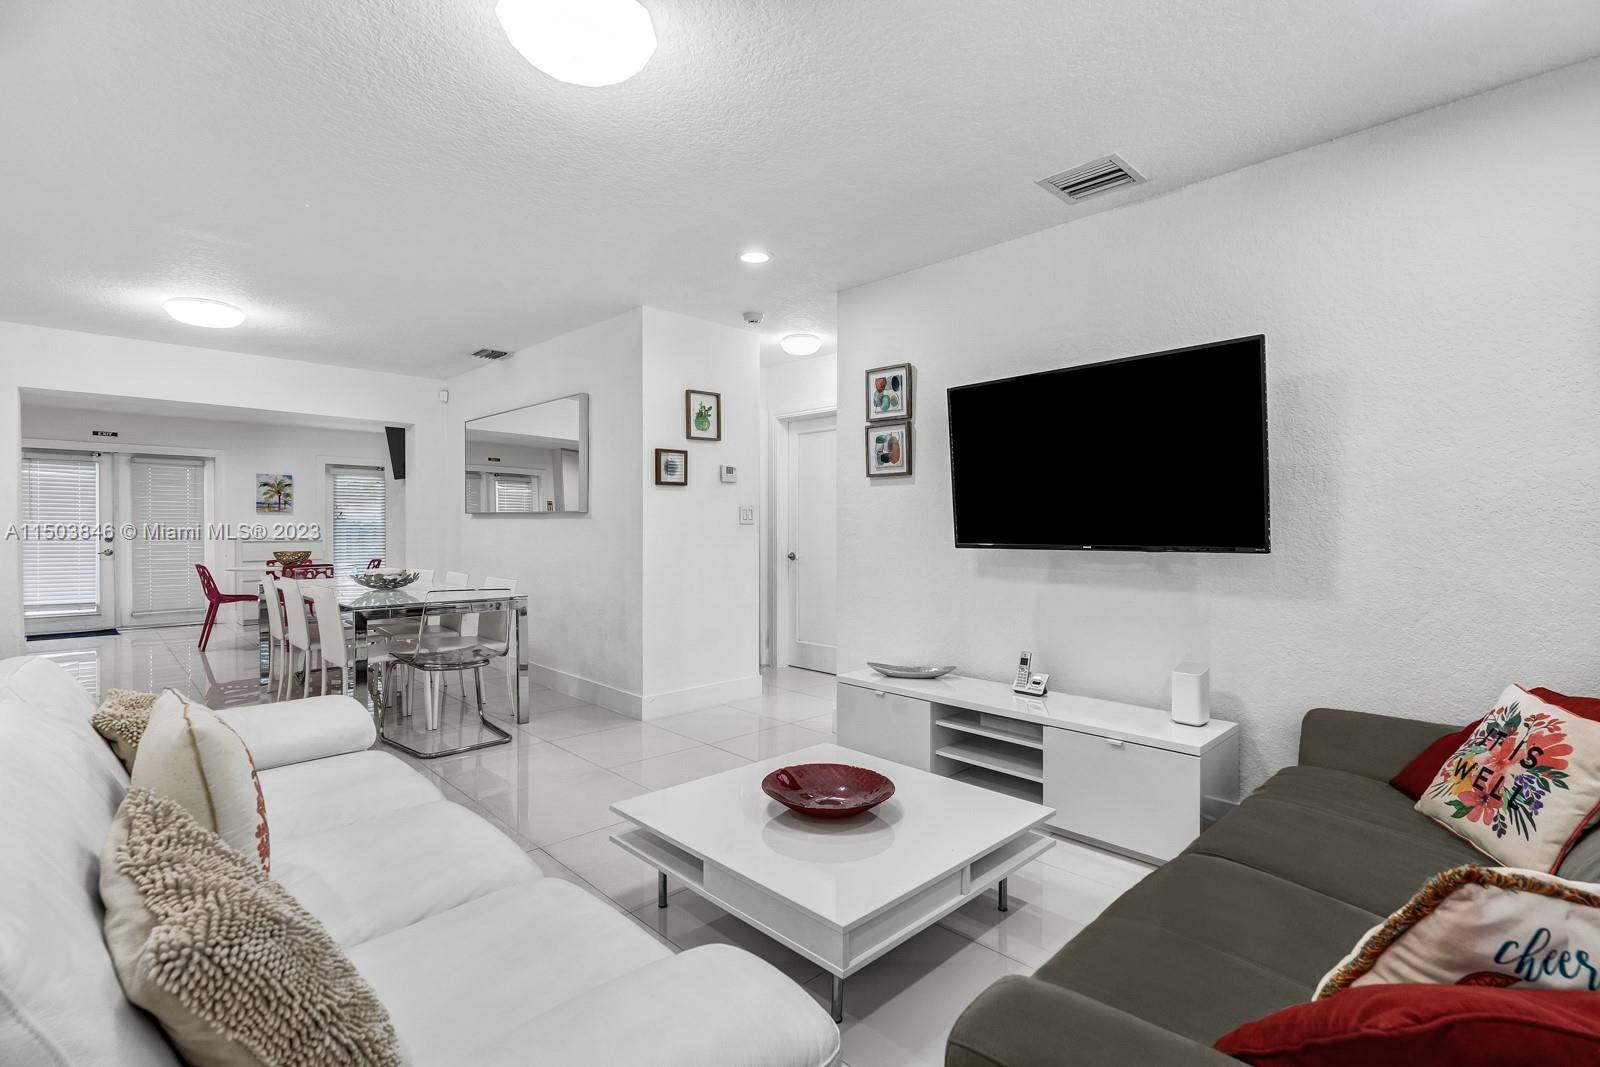 Completely furnished. Gorgeous contemporary home, exceptionally luminous, completely renovated, featuring a spacious backyard with a sizable heated pool.